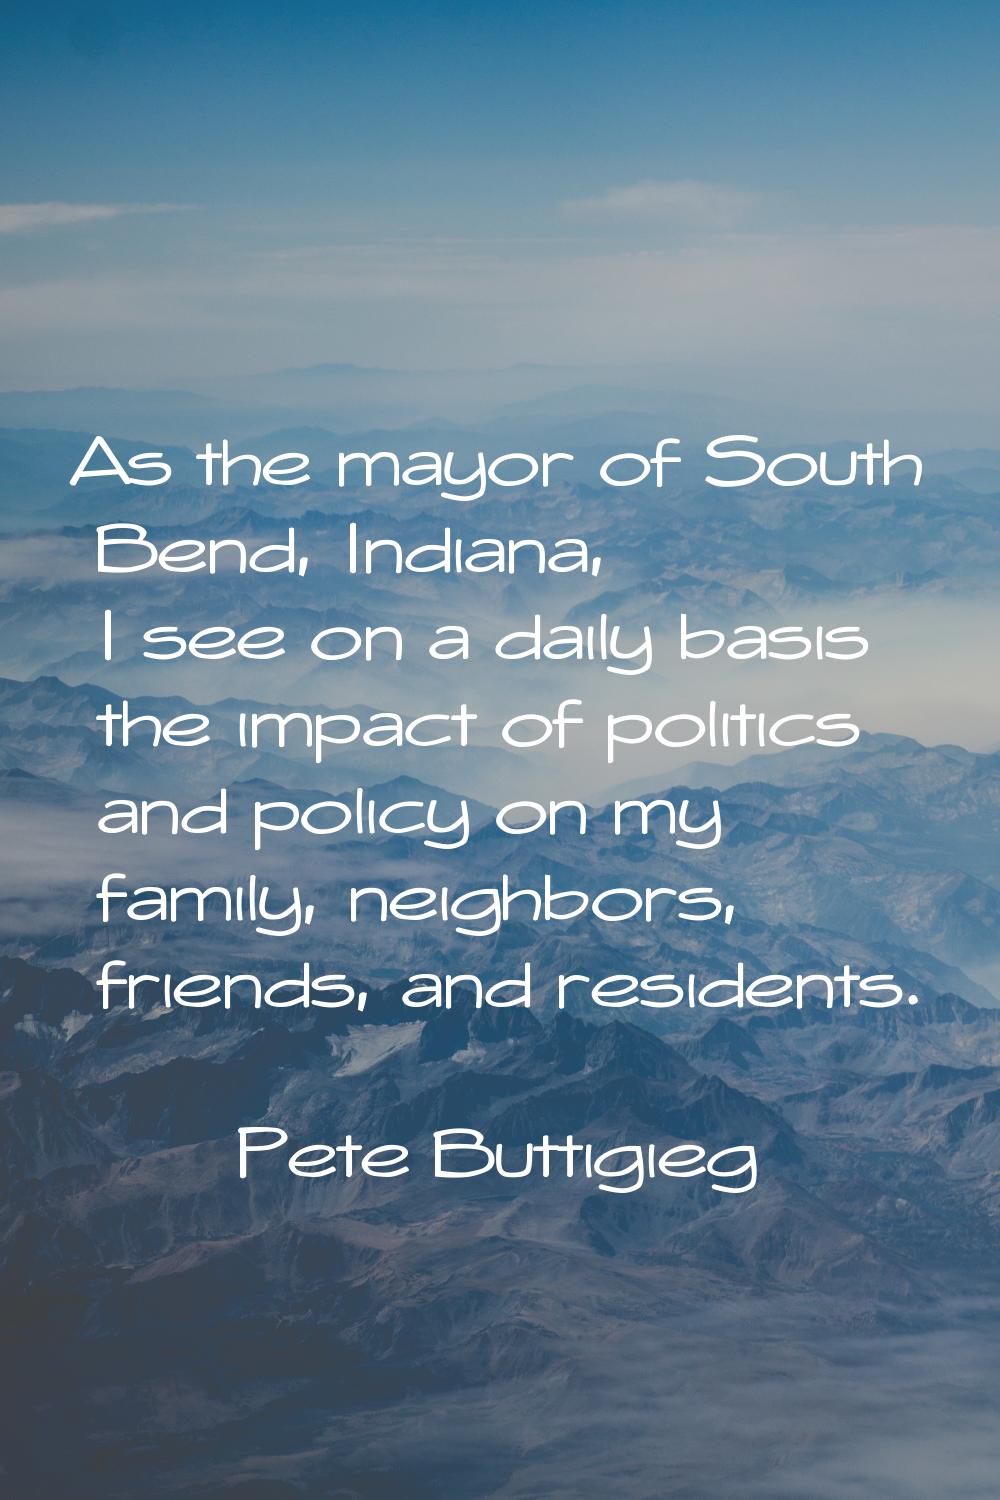 As the mayor of South Bend, Indiana, I see on a daily basis the impact of politics and policy on my